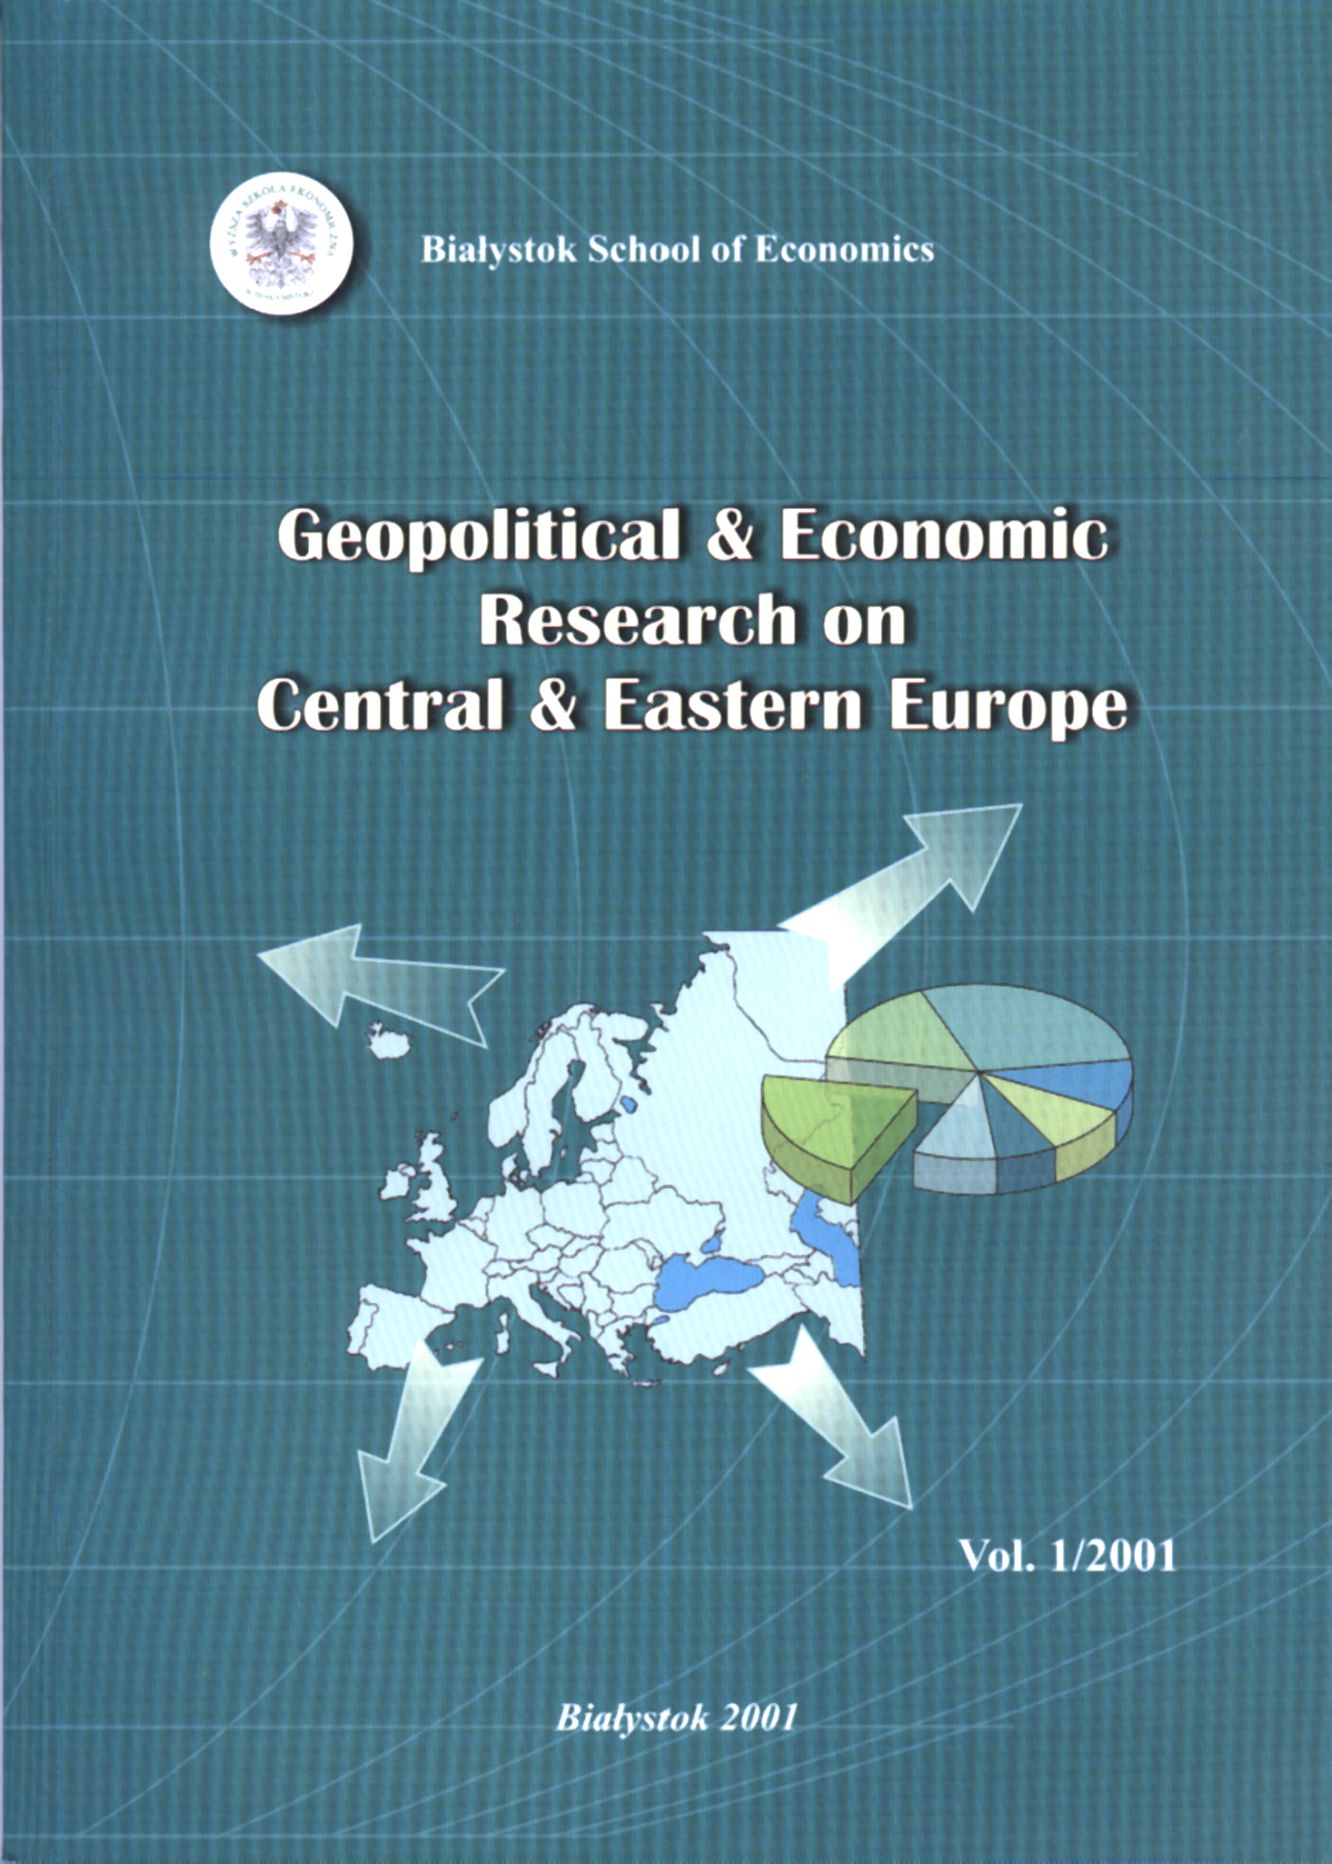 Geopolitical & Economic Research on Central & Eastern Europe vol 1/2001